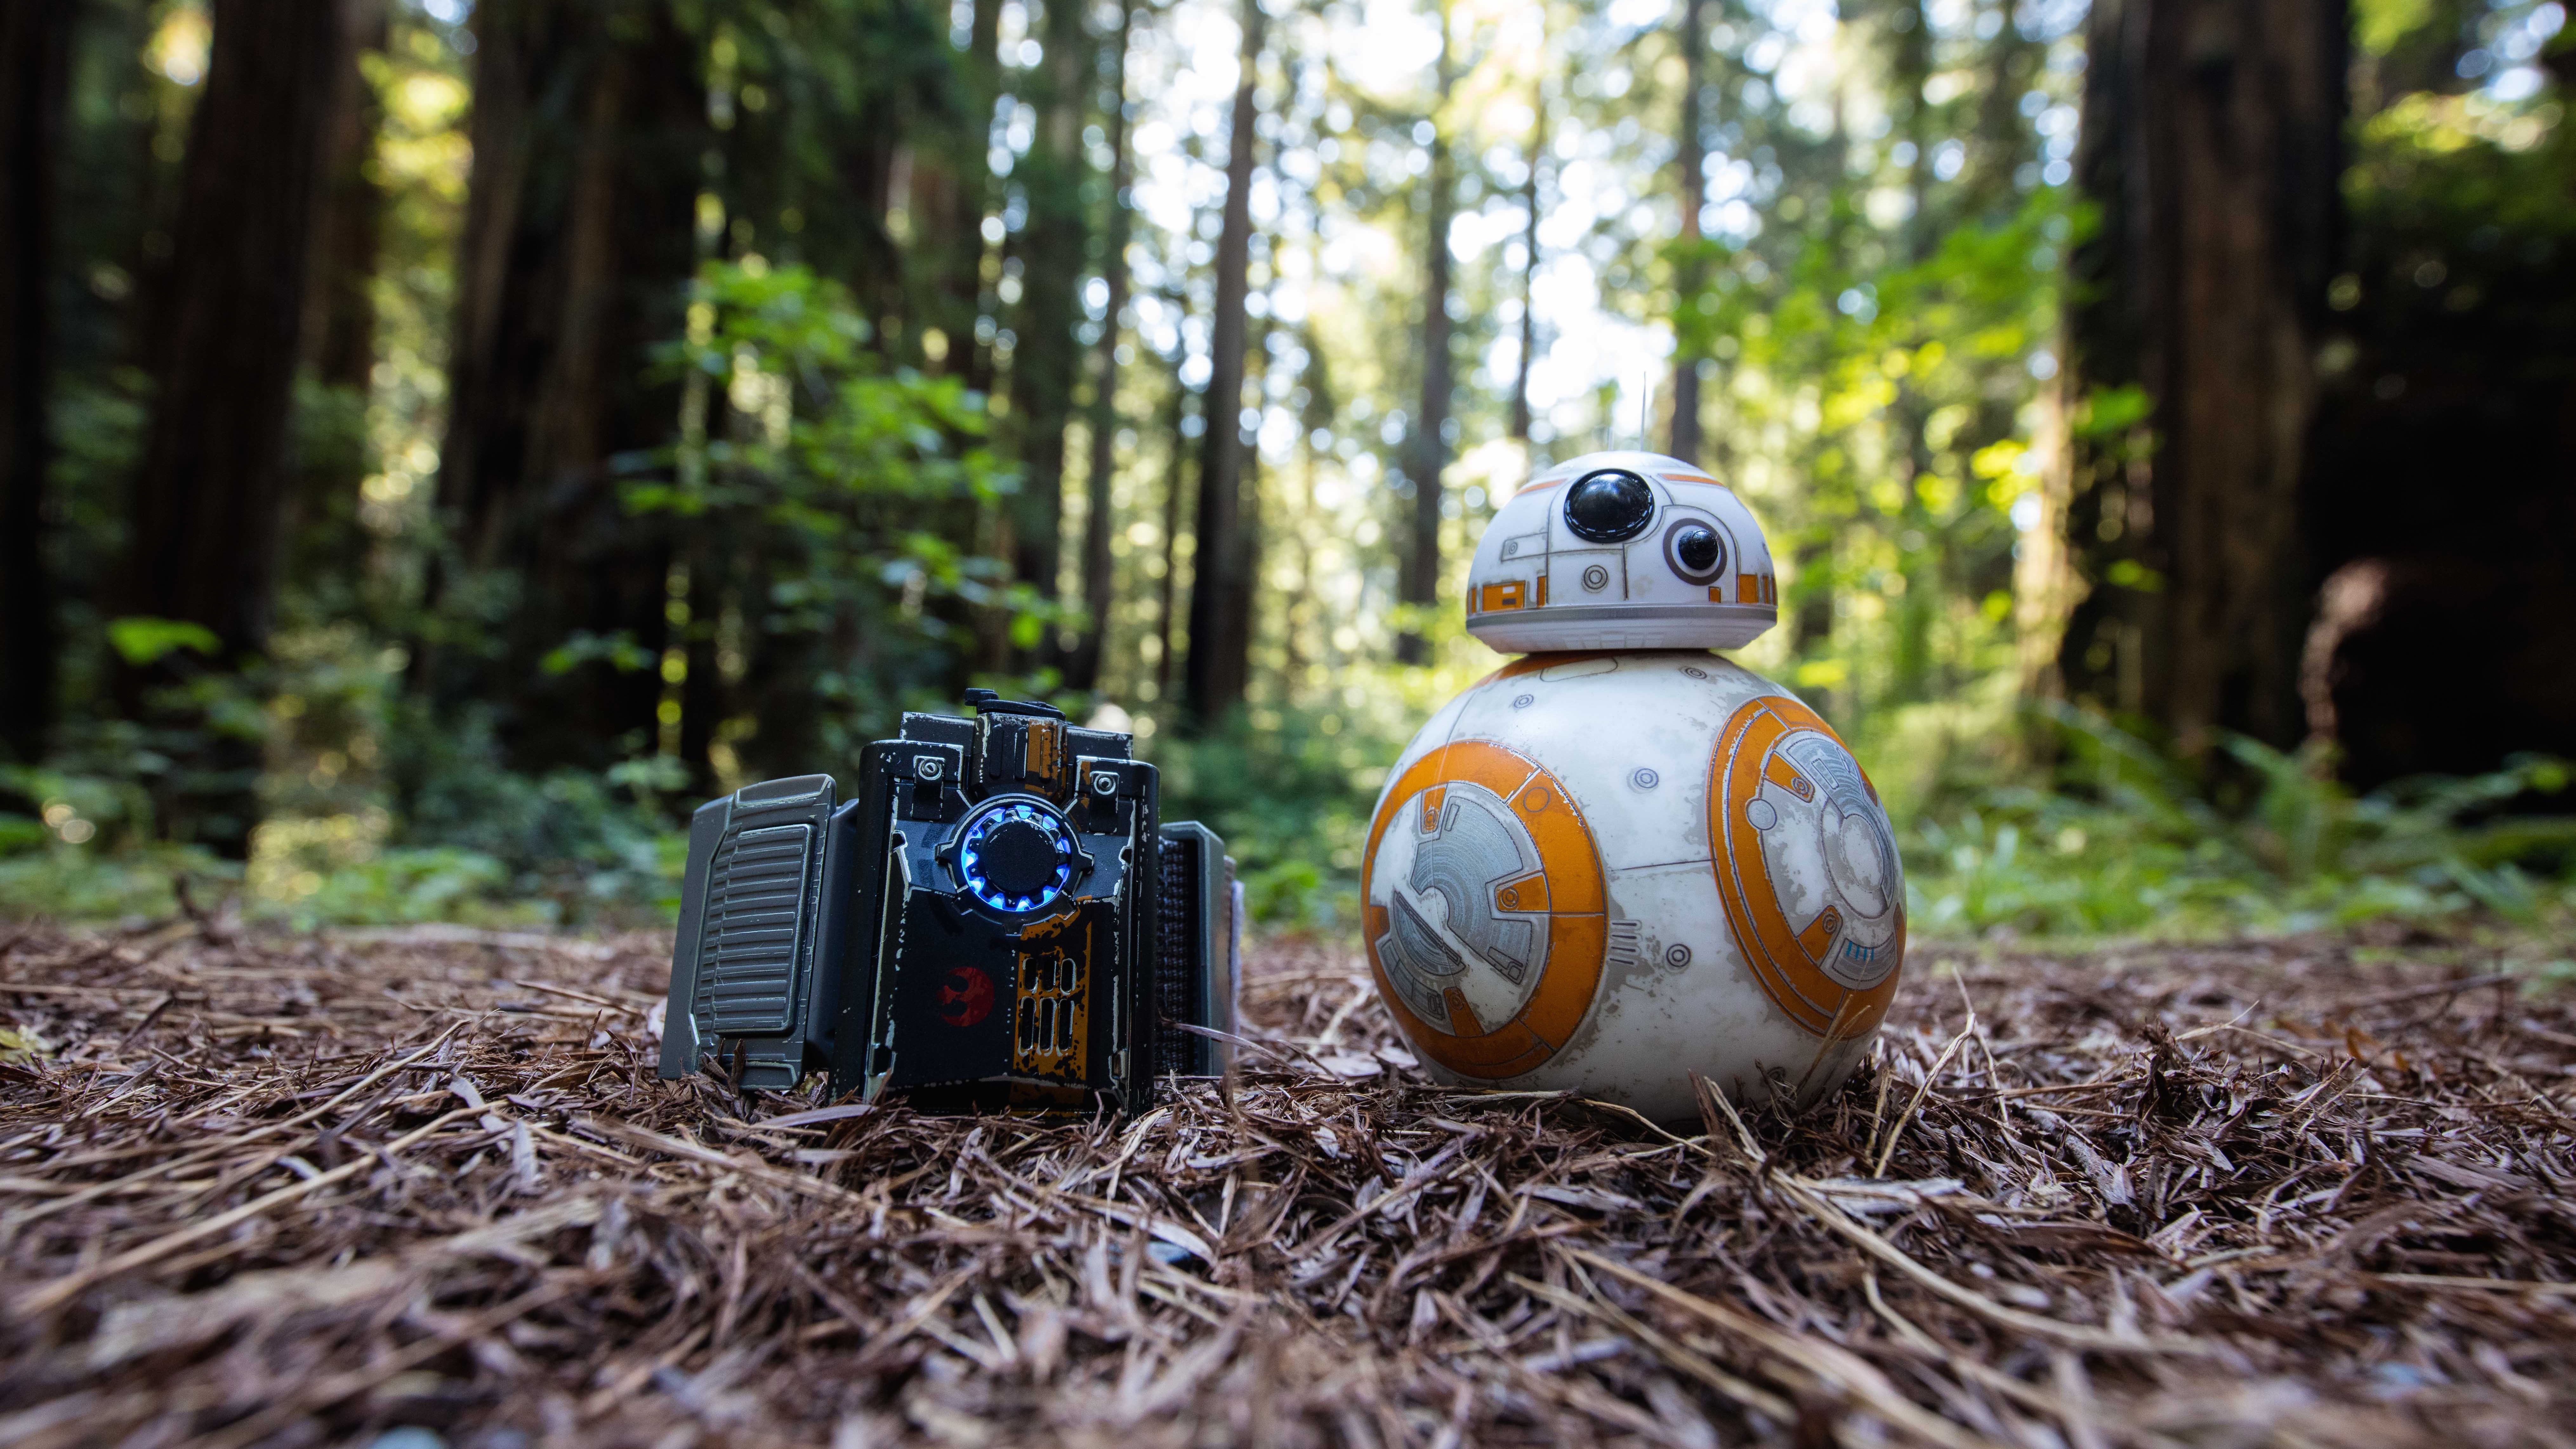 bb8 robot with force band